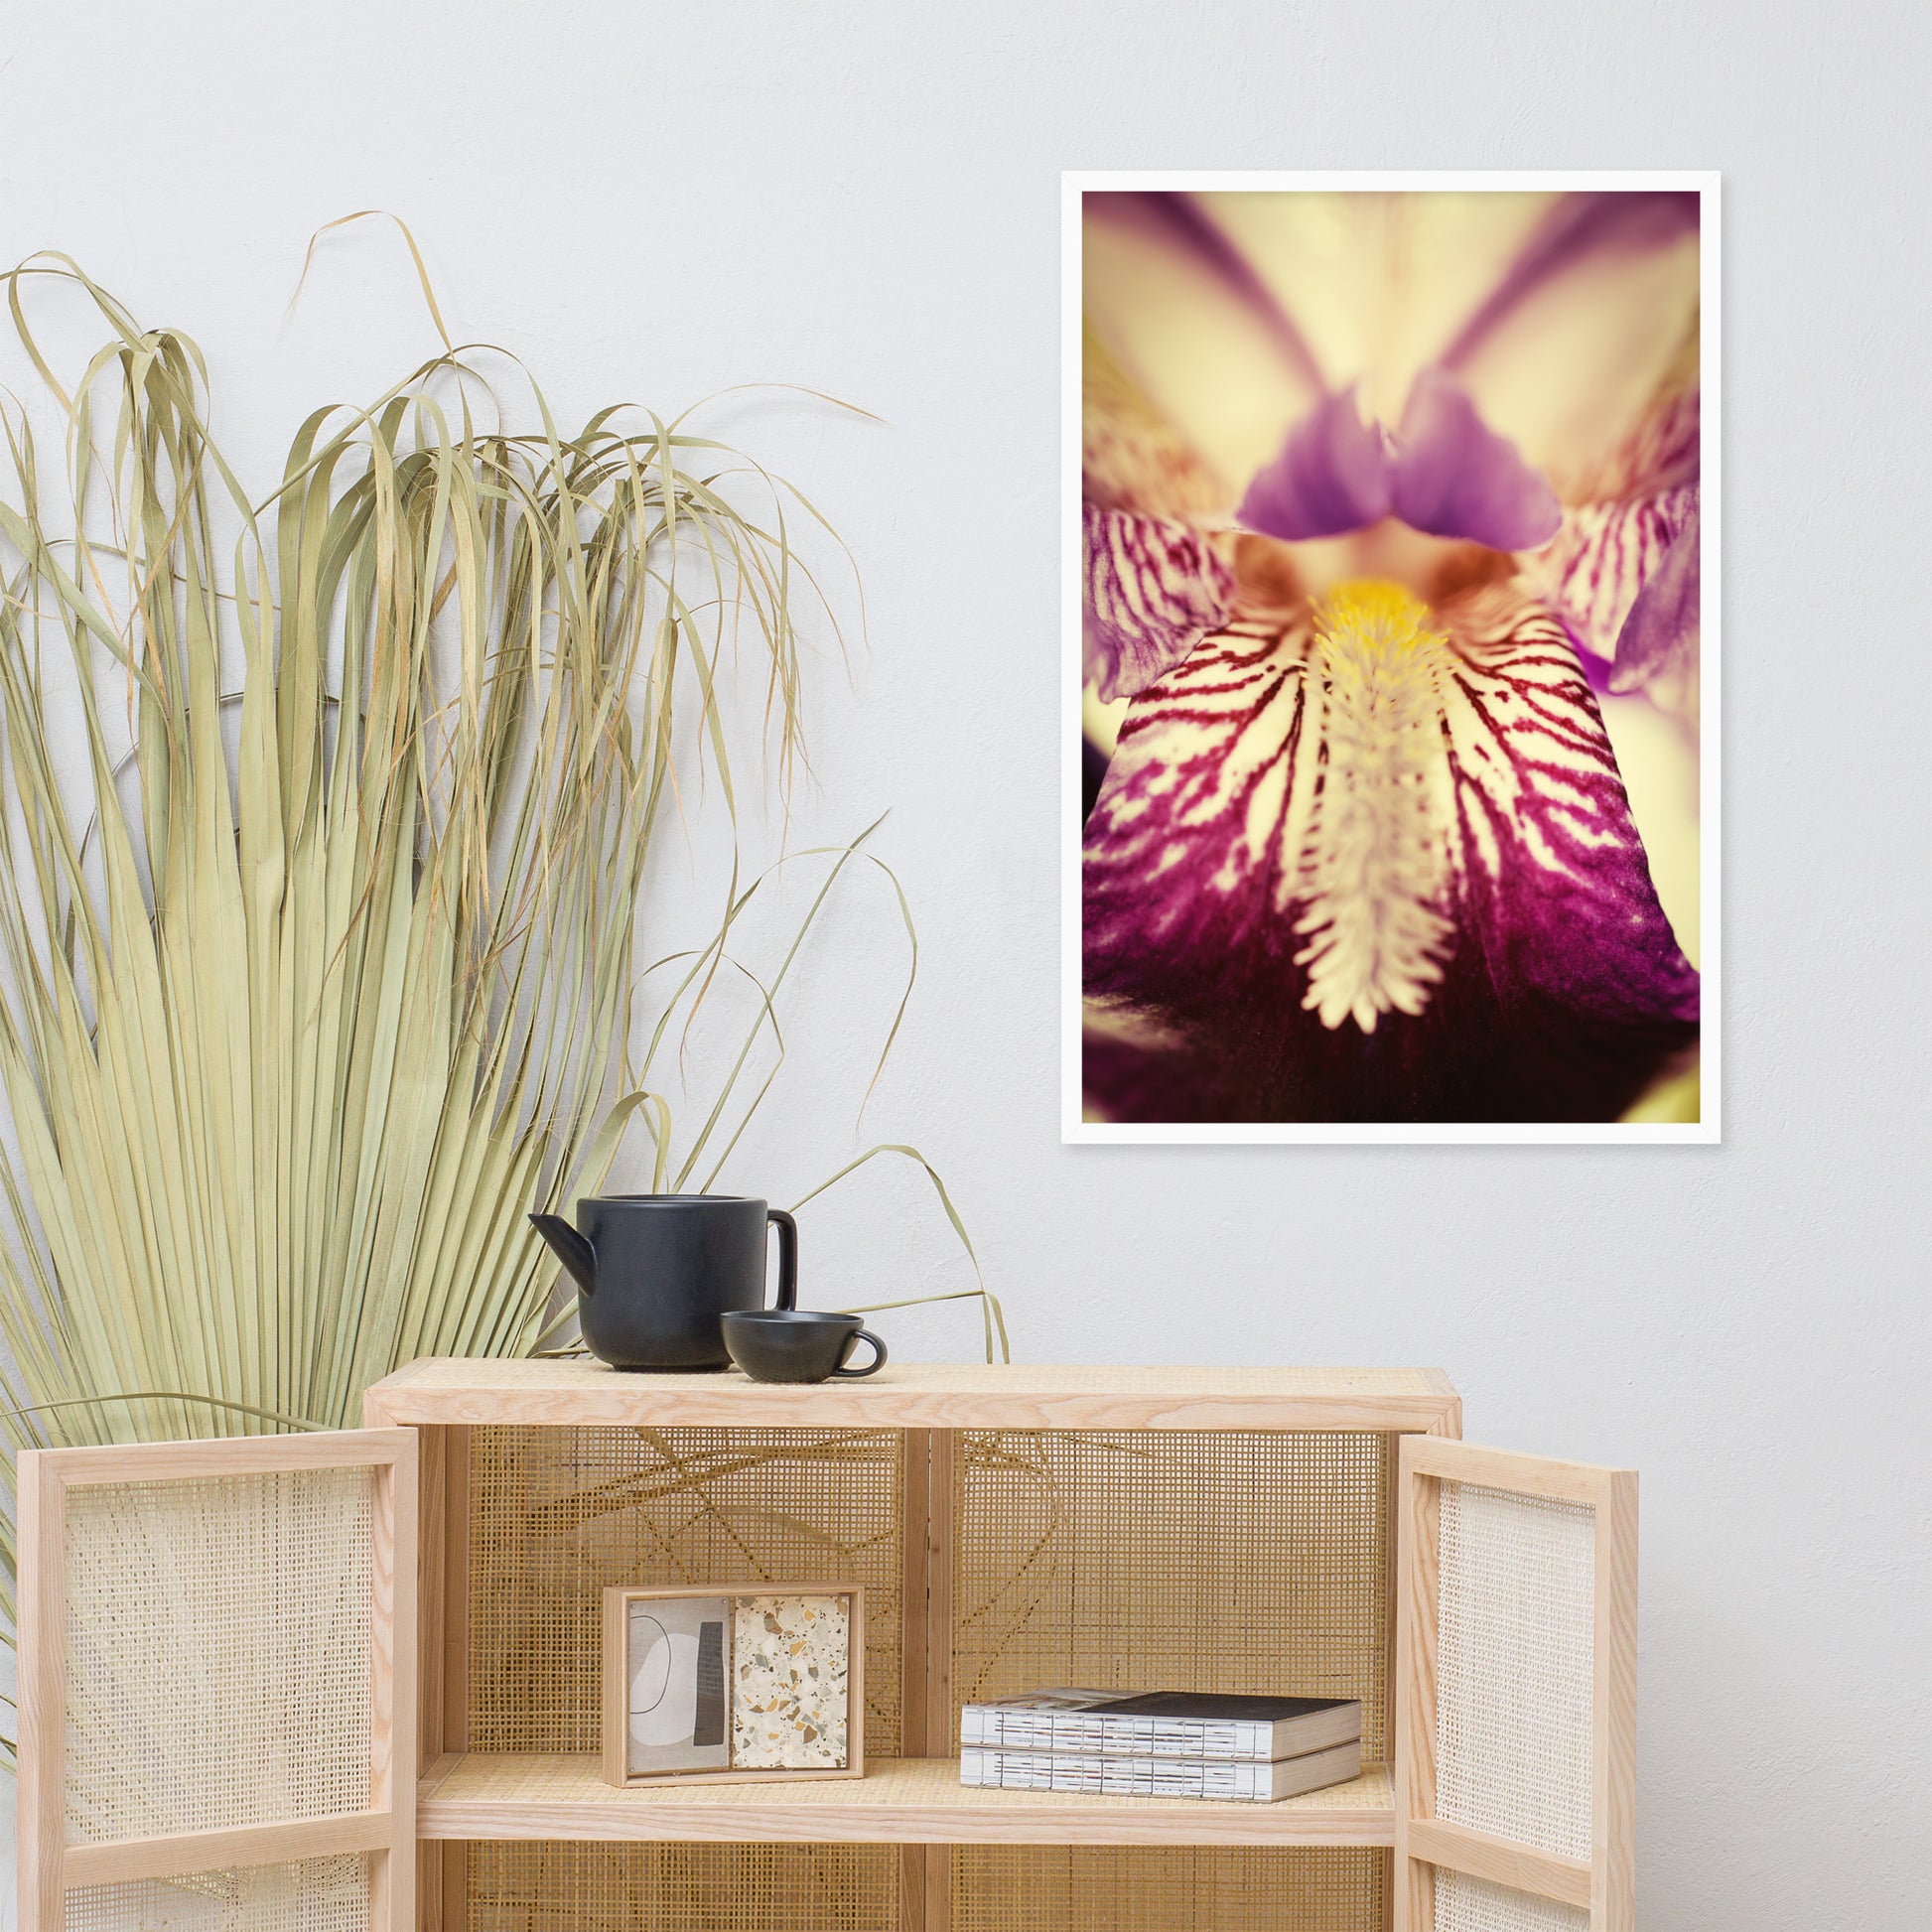 Flower Pictures For Wall: Antiqued Iris Floral / Flora / Botanical / Nature Photo Framed Wall Art Print - Artwork - Modern Wall Decor